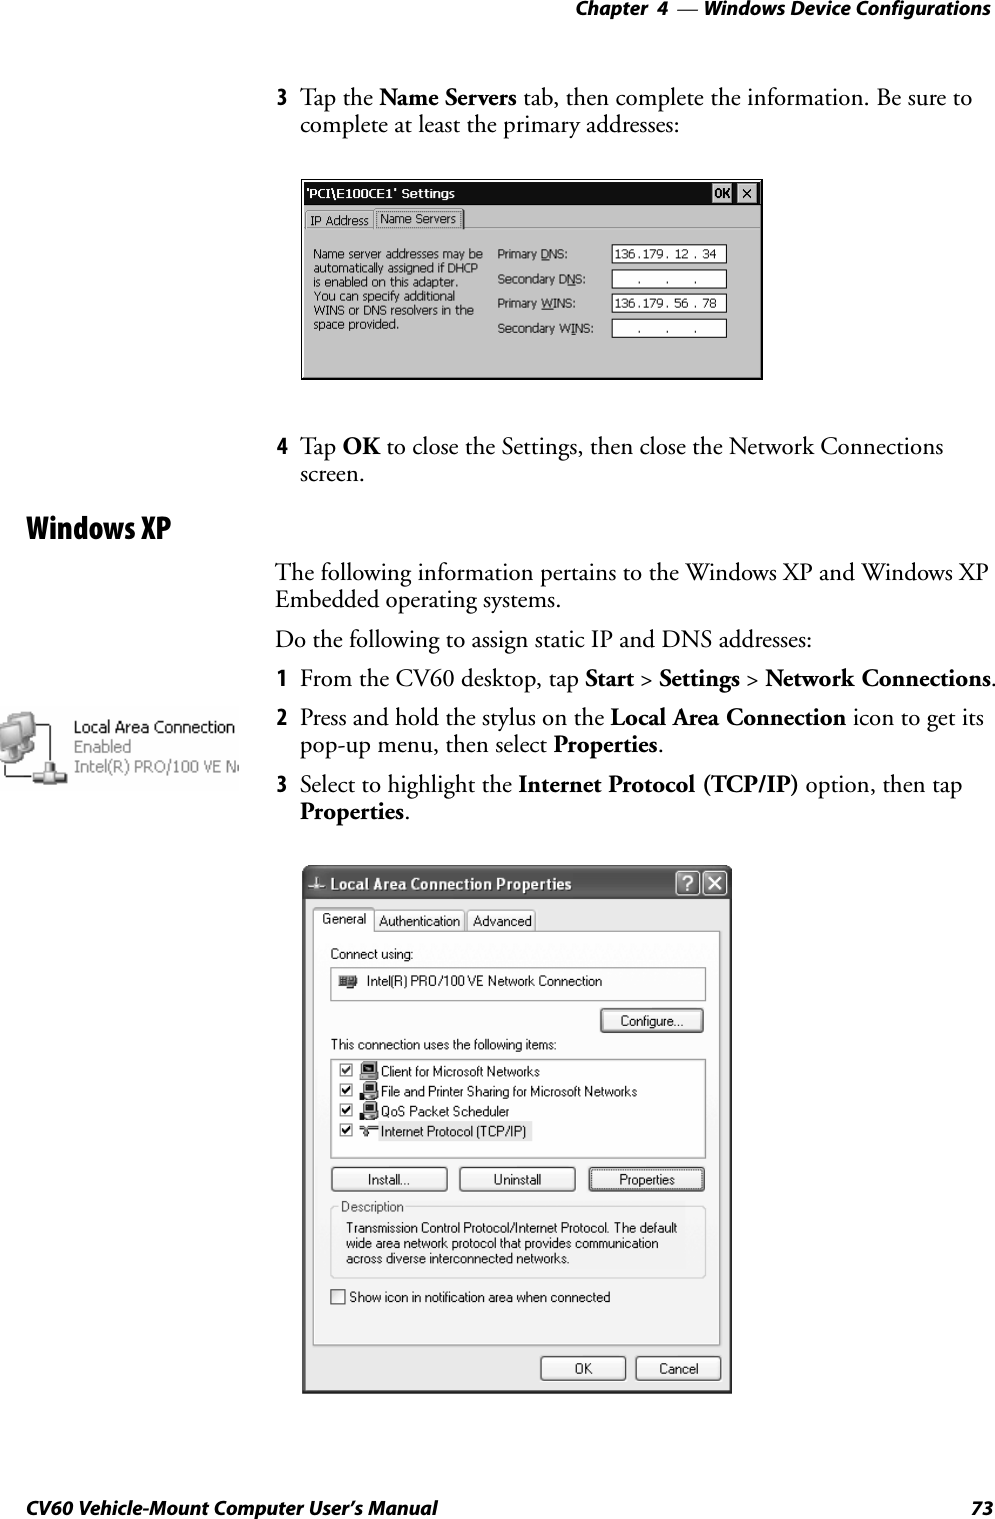 Windows Device Configurations—Chapter  473CV60 Vehicle-Mount Computer User&apos;s Manual3Tap the Name Servers tab, then complete the information. Be sure tocomplete at least the primary addresses:4Tap OK to close the Settings, then close the Network Connectionsscreen.Windows XPThe following information pertains to the Windows XP and Windows XPEmbedded operating systems.Do the following to assign static IP and DNS addresses:1From the CV60 desktop, tap Start &gt; Settings &gt; Network Connections.2Press and hold the stylus on the Local Area Connection icon to get itspopĆup menu, then select Properties.3Select to highlight the Internet Protocol (TCP/IP) option, then tapProperties.